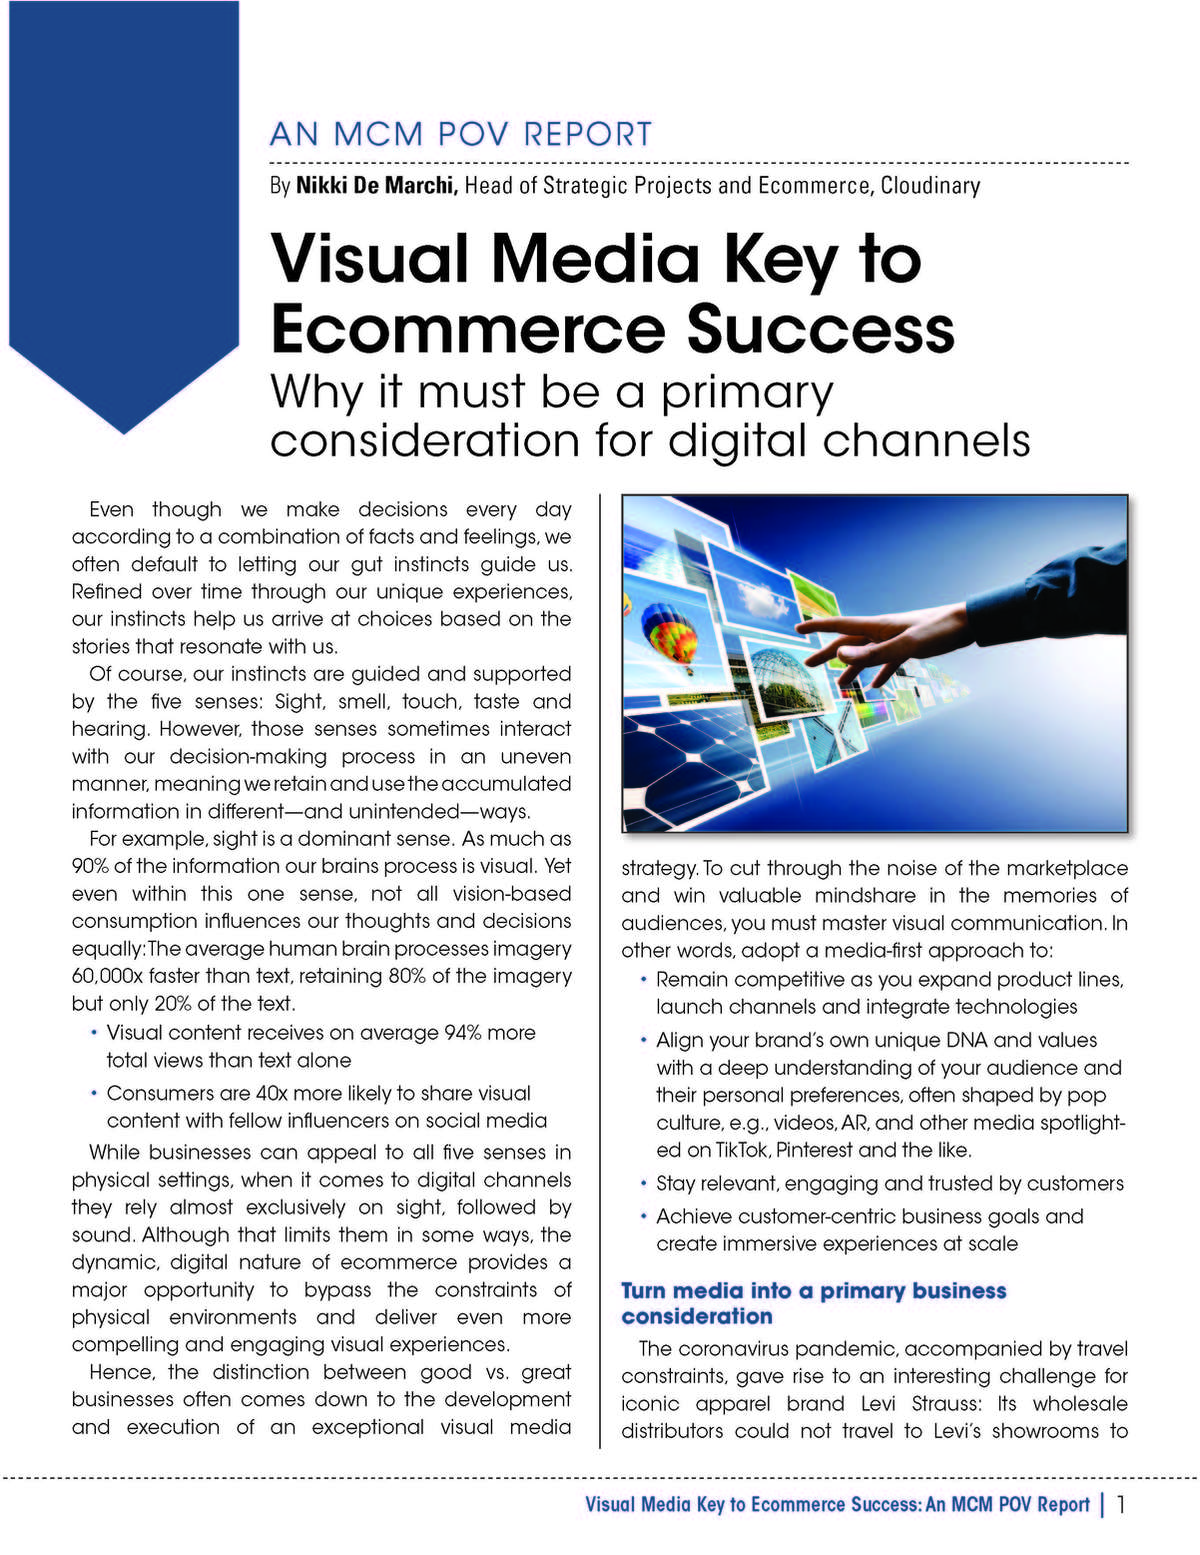 Visual Media Is Key to Ecommerce Success